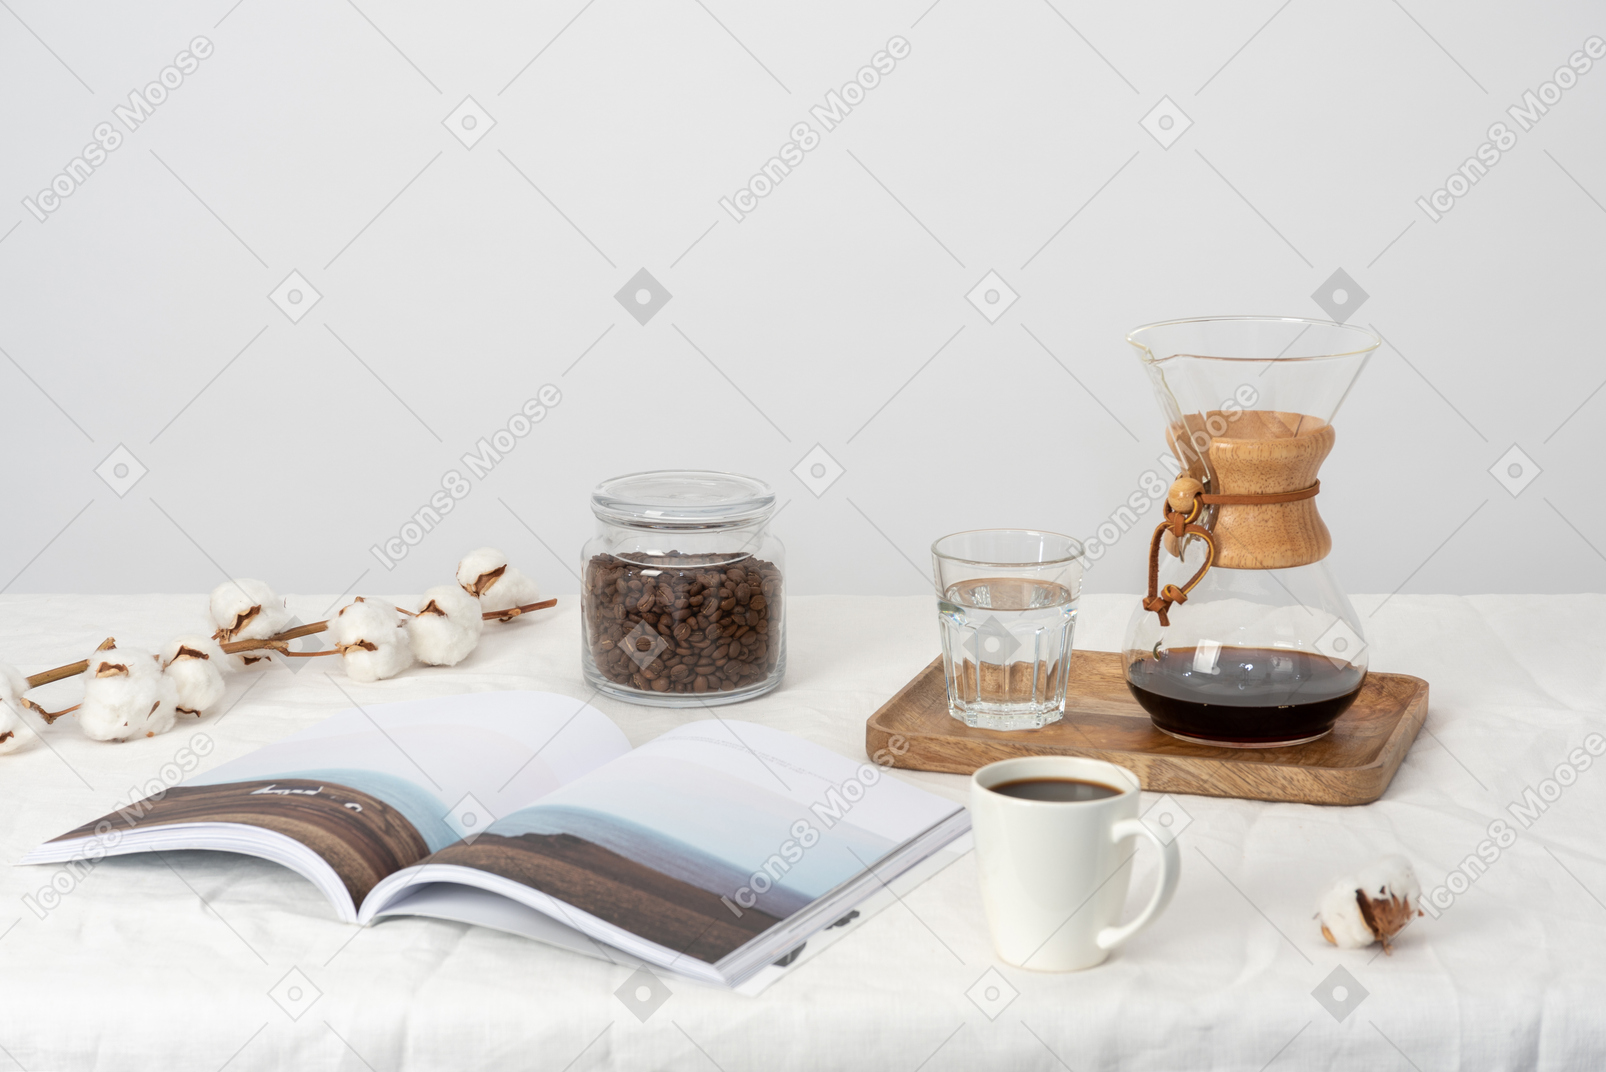 Chemex and glass of water on the tray, large glass of water, jar with coffee beans, magazibe and cotton branch